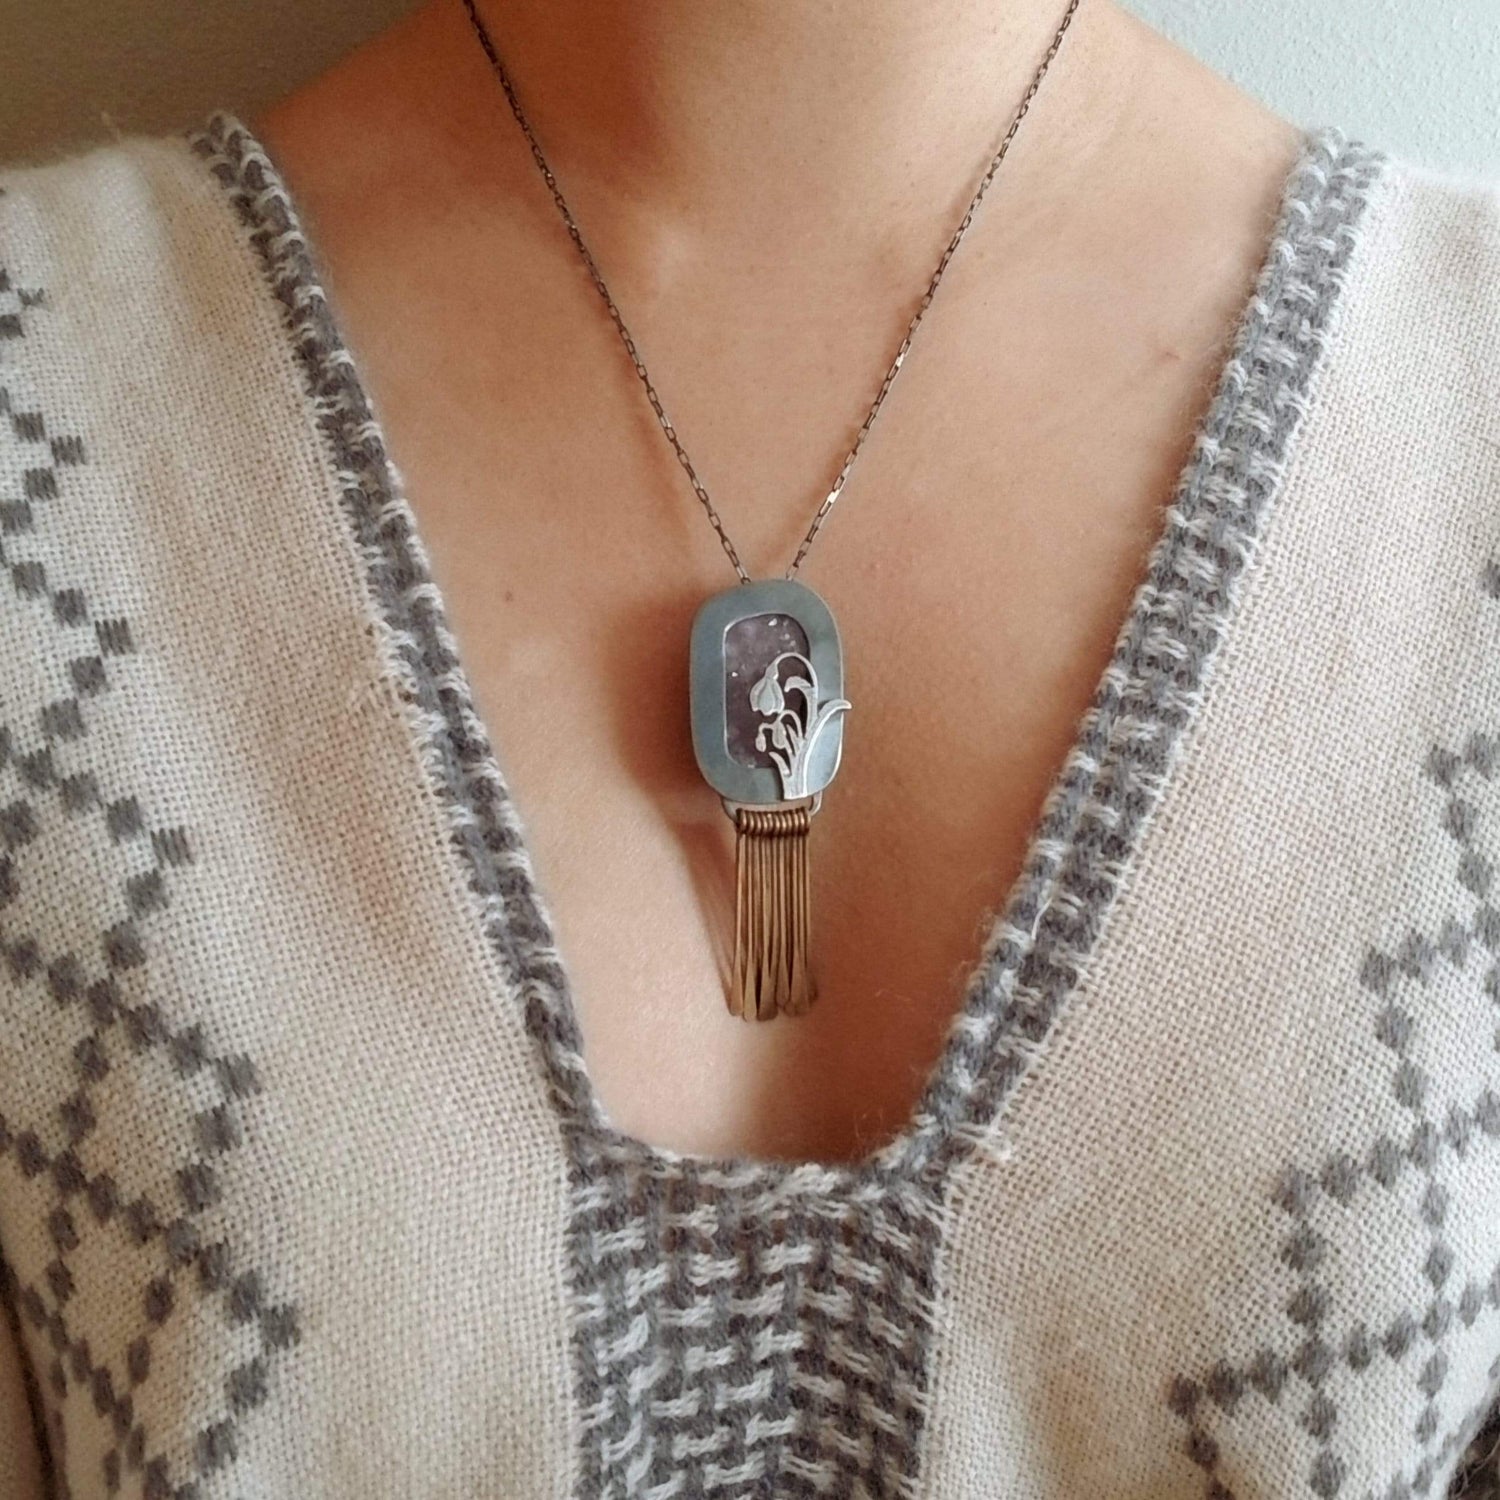 Model wearing Snowdrop Necklace No. 3 - A retangular amethyst druzy (pale purple) set in a sterling silver box frame. A hand pierced and hand engraved snowdrop is soldered on the bottm left. Handmade brass fringe hangs below the box frame. All hanging on a sterling silver chain.